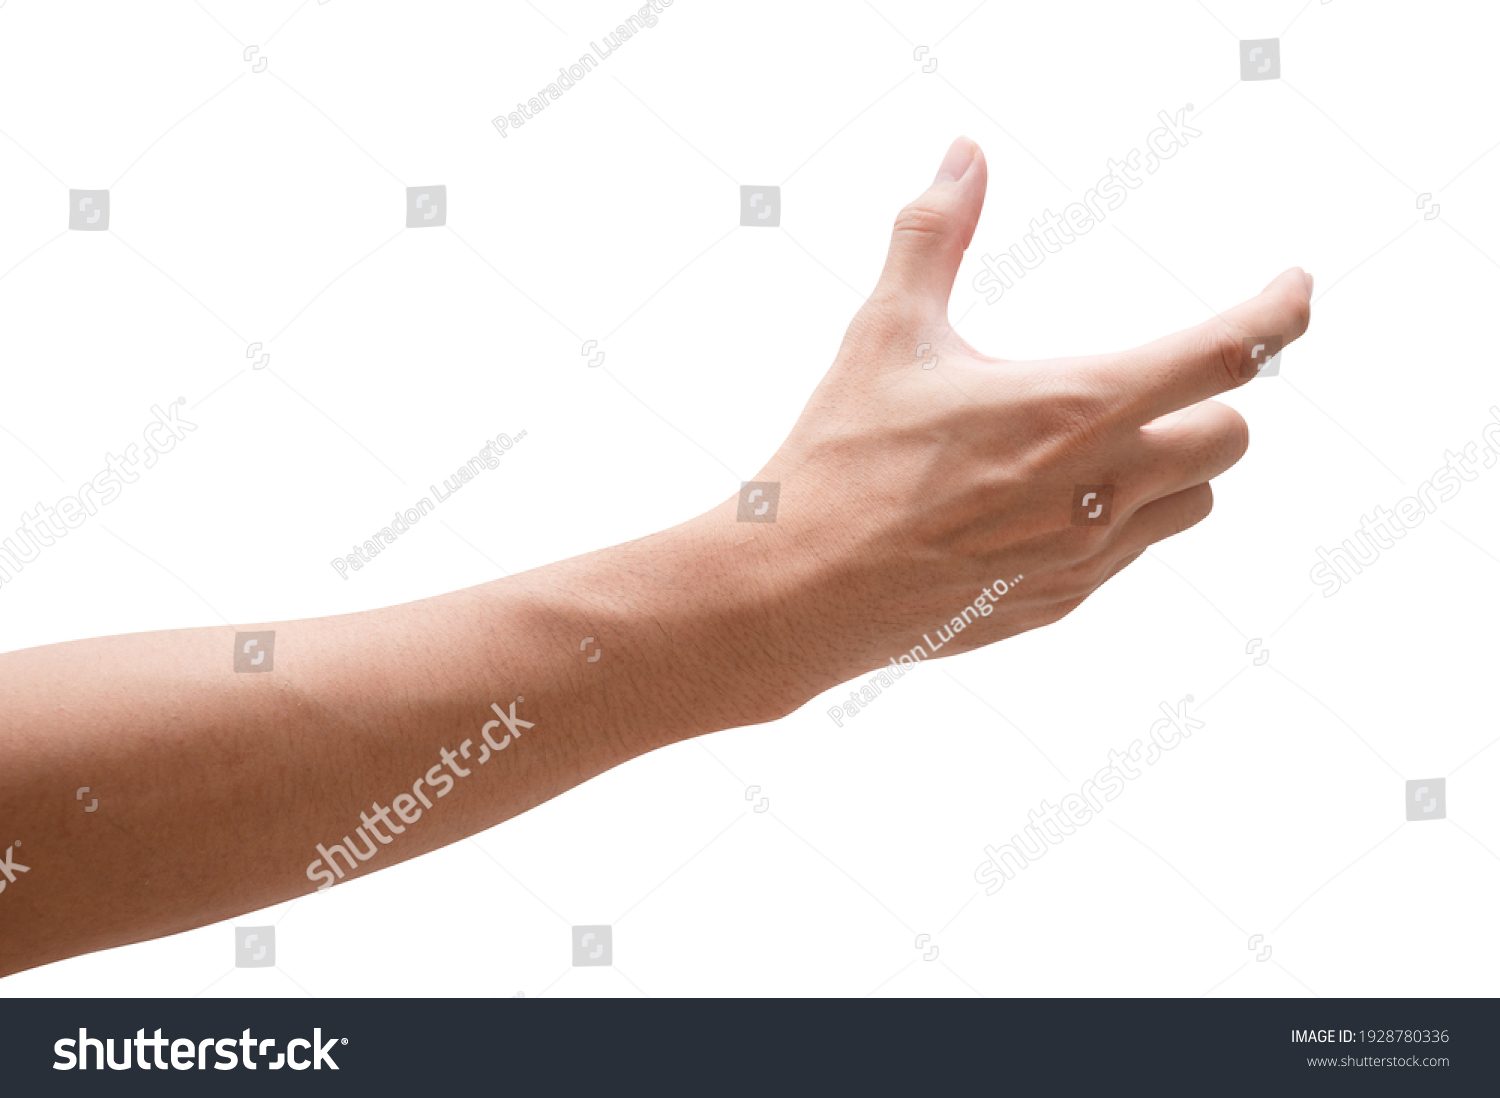 Close up male hand holding something like a bottle or can isolated on white background with clipping path. #1928780336